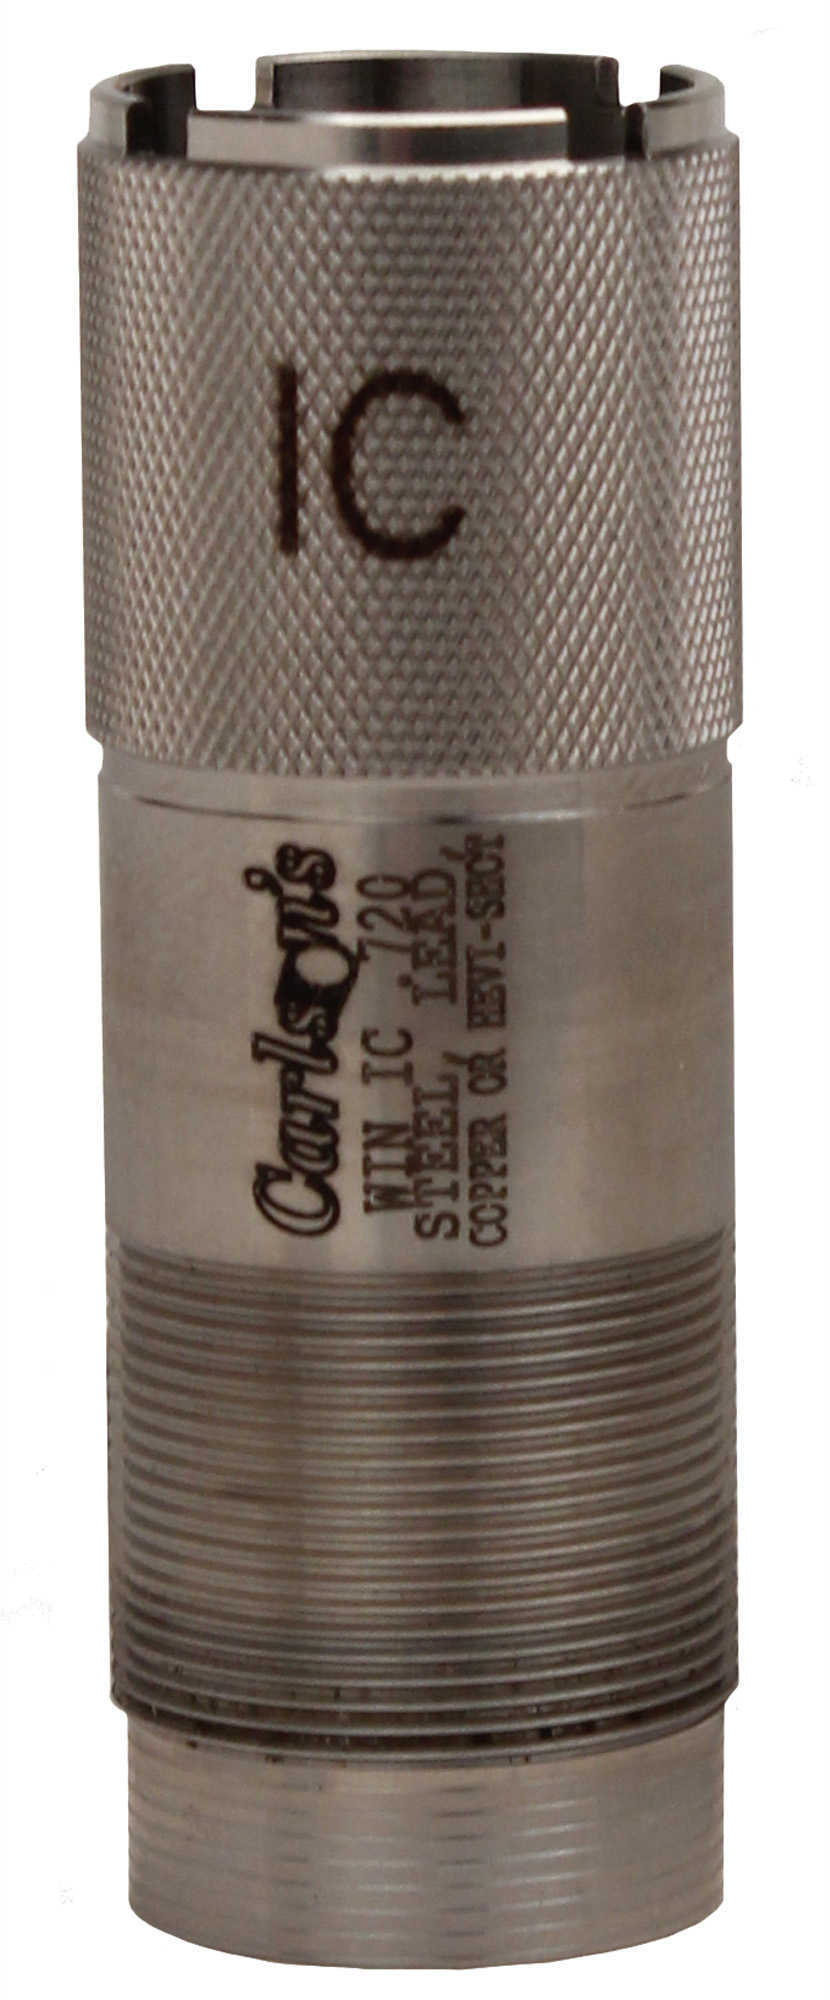 Carlsons Winchester Sporting Clay Choke Tubes 12 Gauge, Improved Cylinder 19772